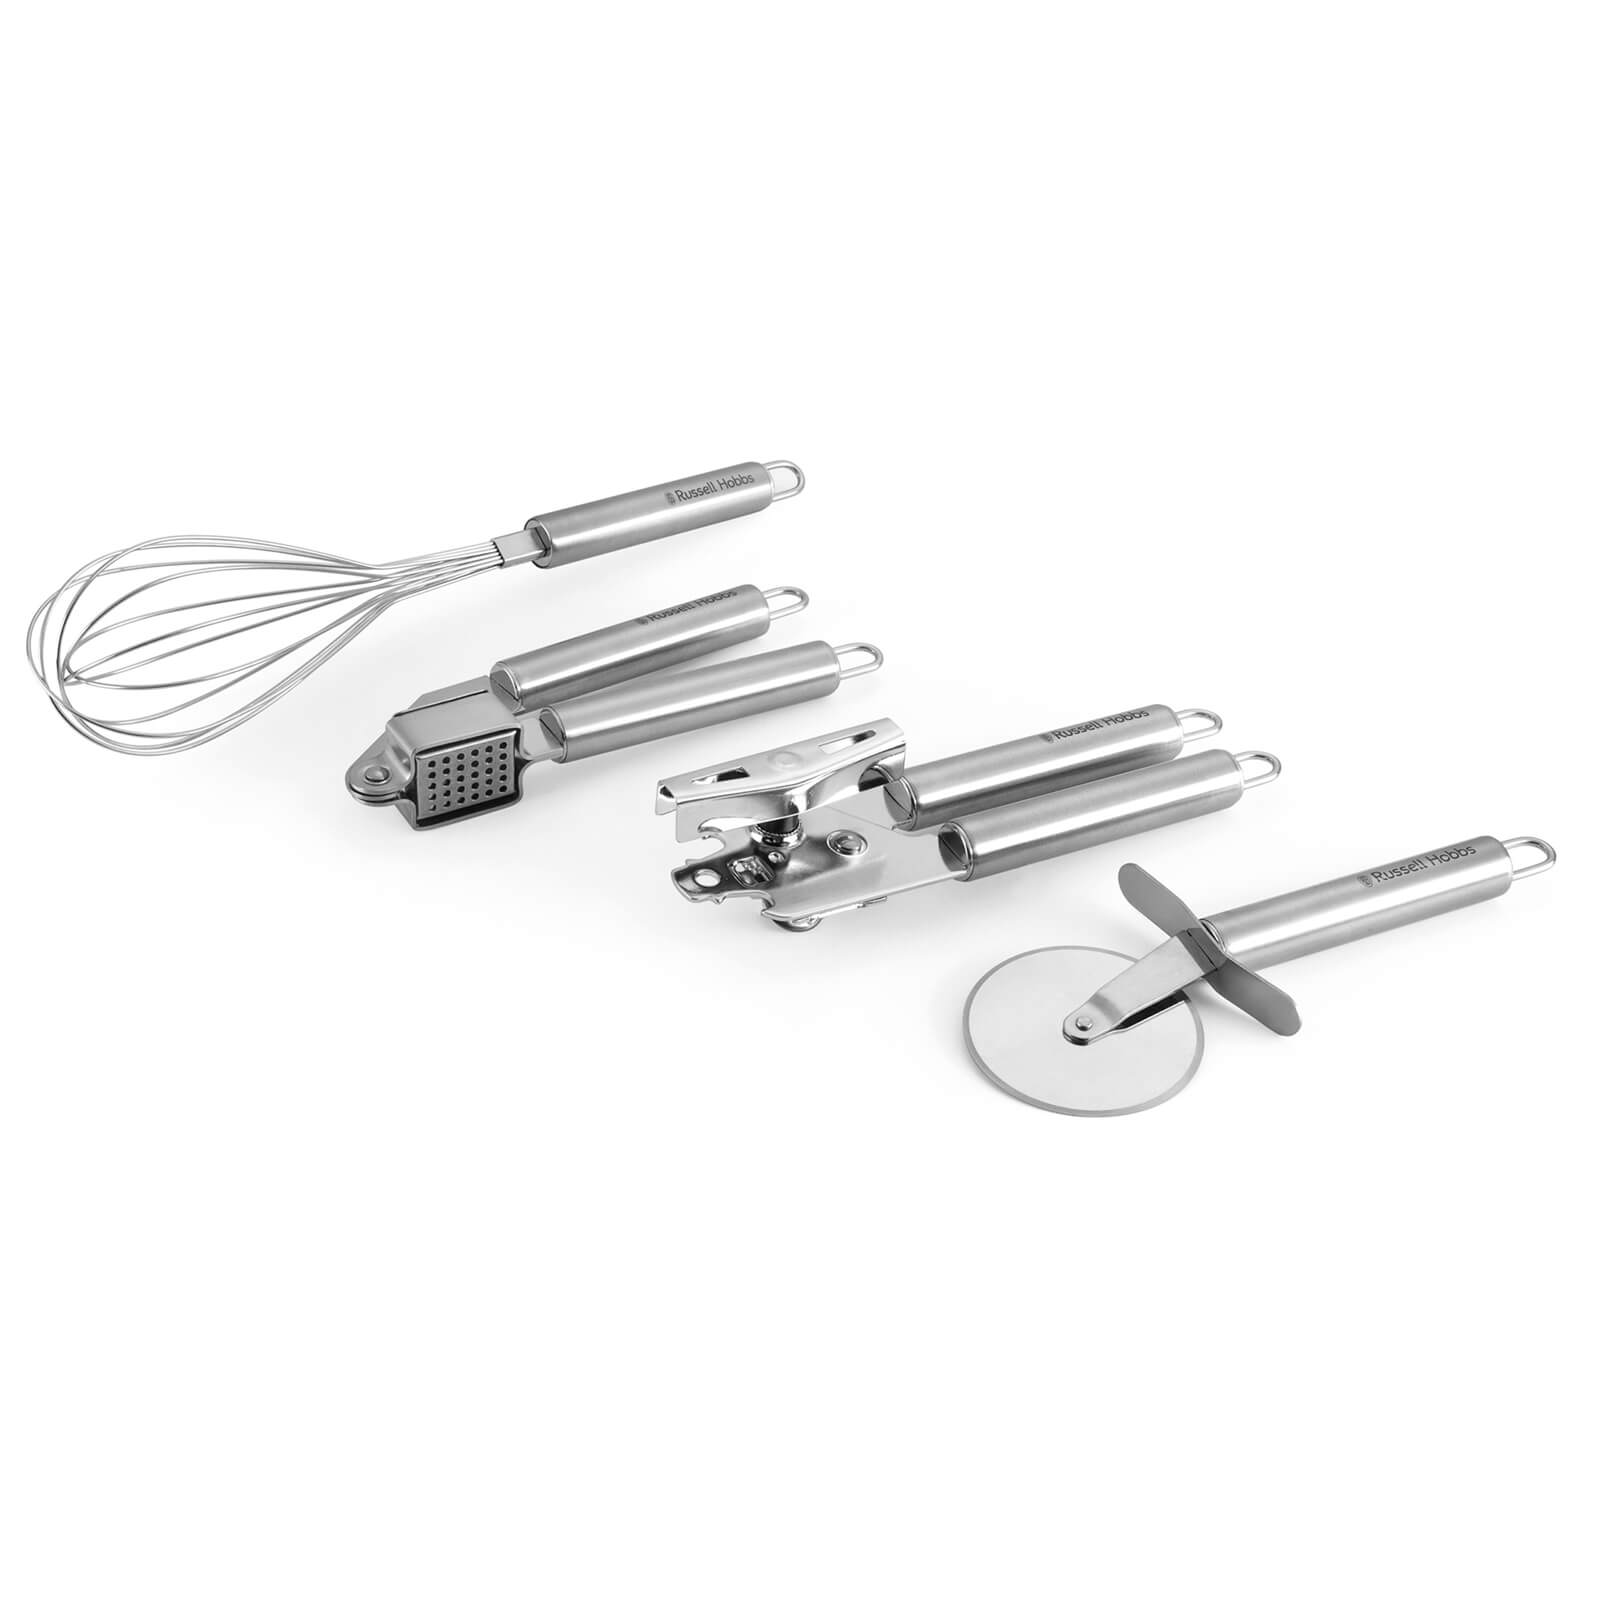 Russell Hobbs 4 Piece Stainless Steel Kitchen Tool Set